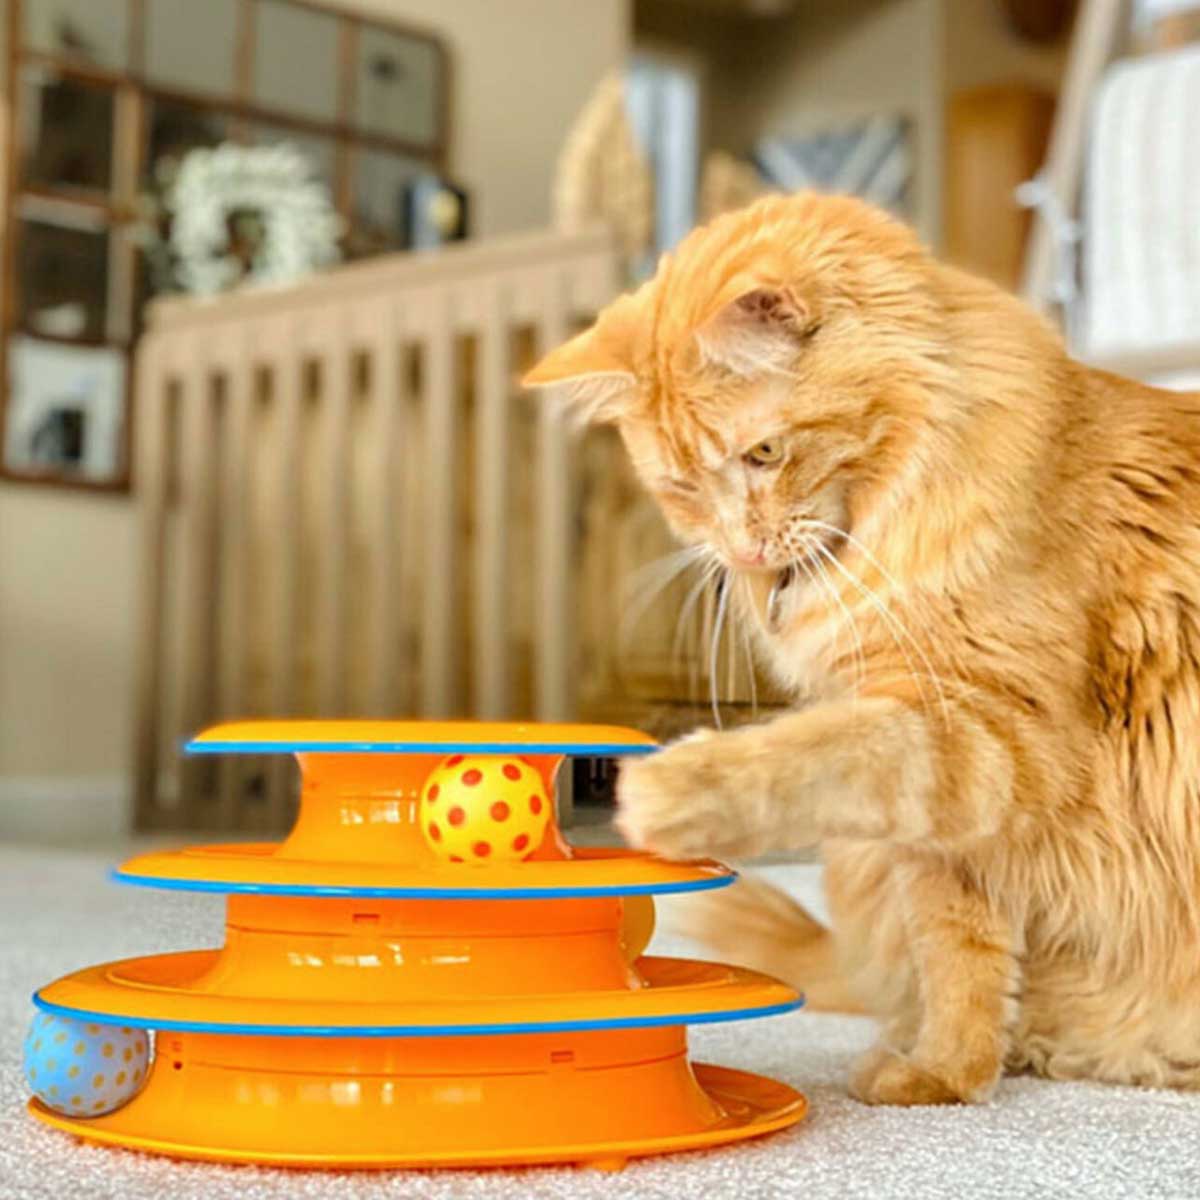 Tower of Tracks Cat Multi Level Toy | Pawlicious & Company